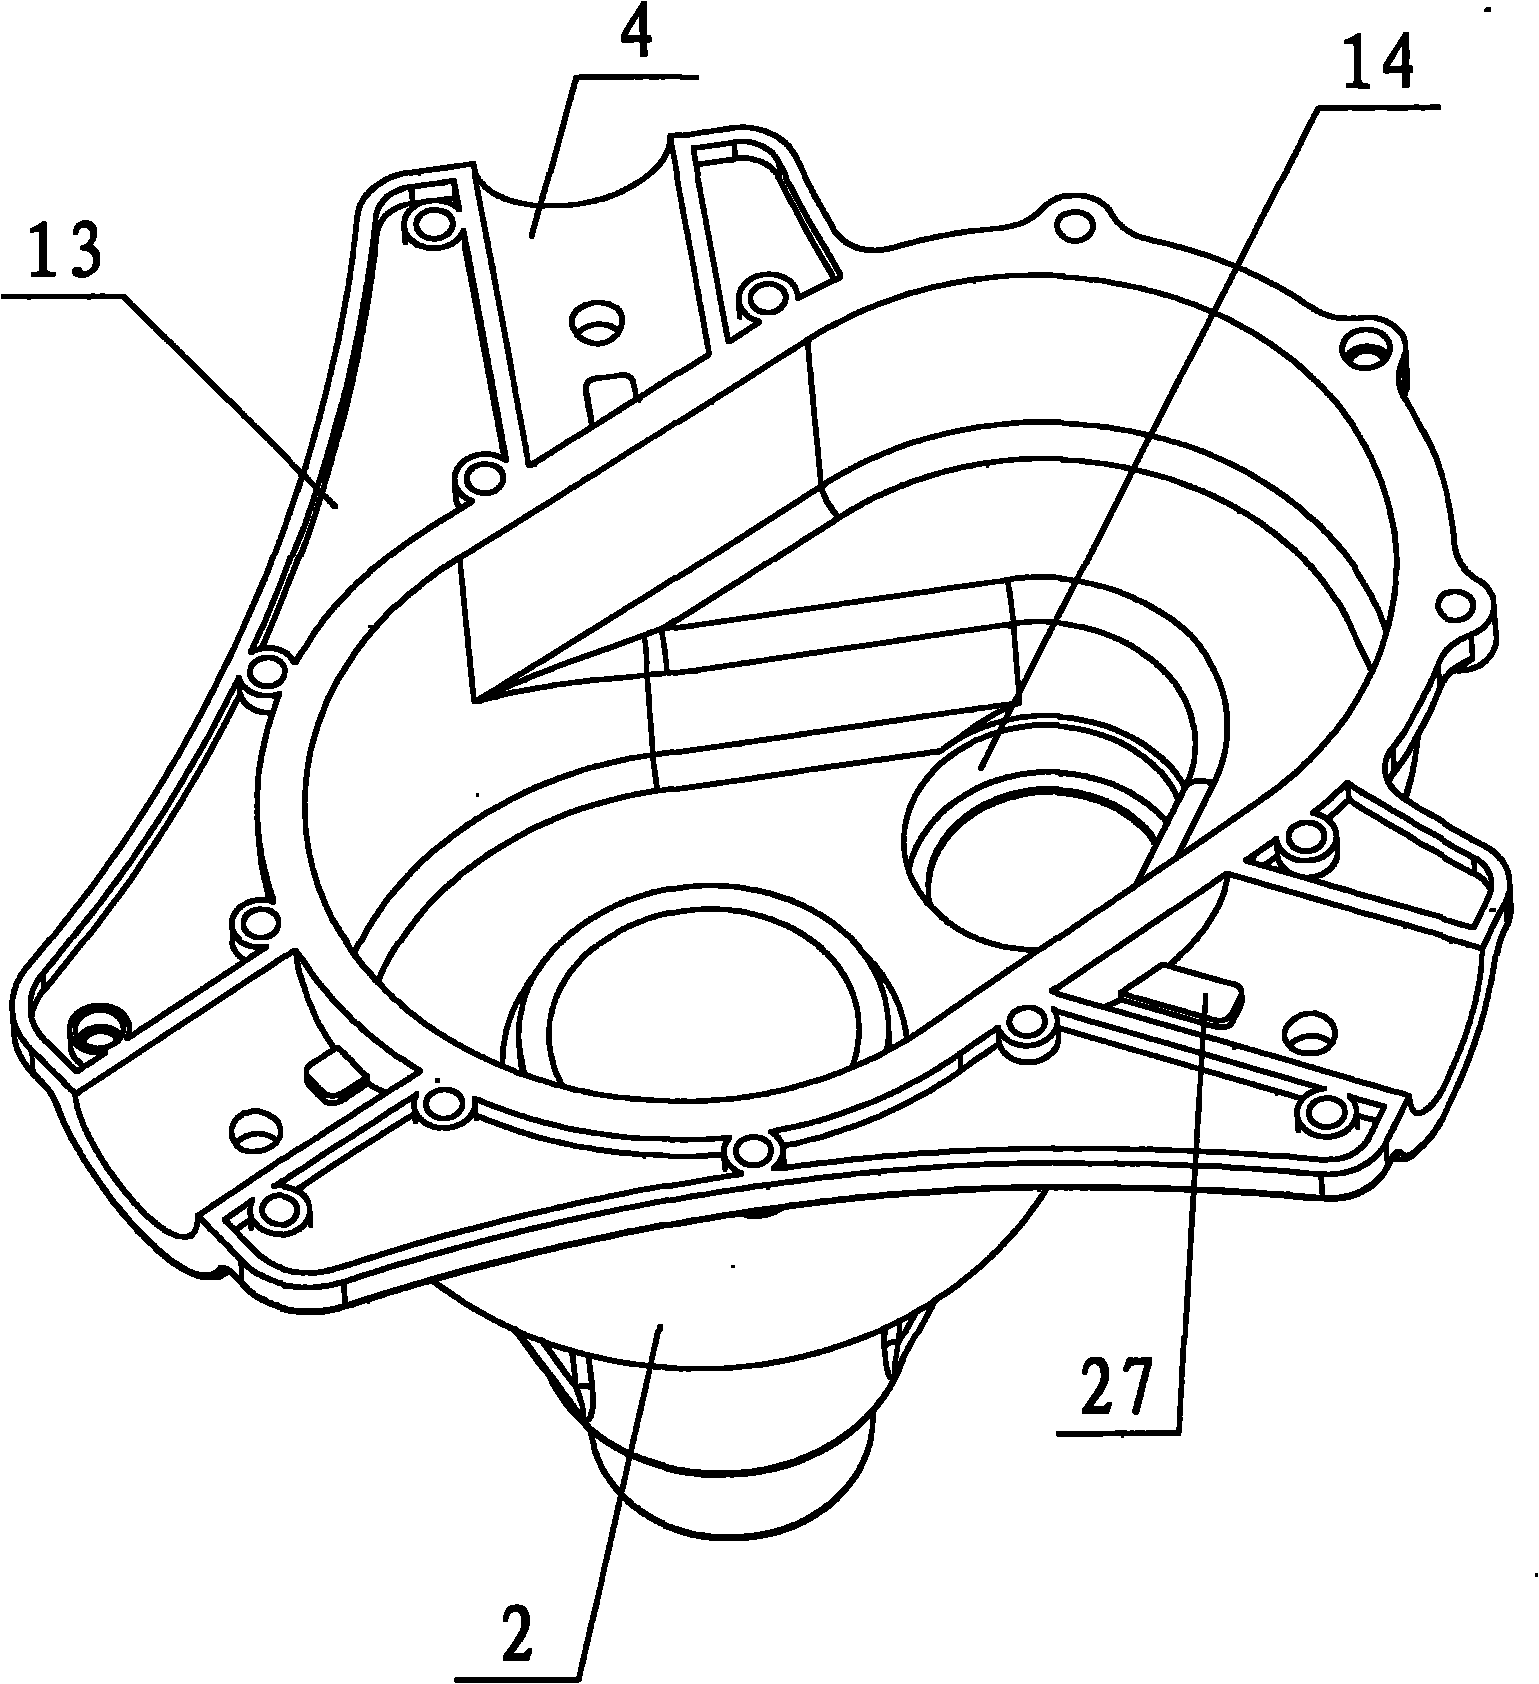 Reduction box of aerator and impeller type aerator provided with reduction box